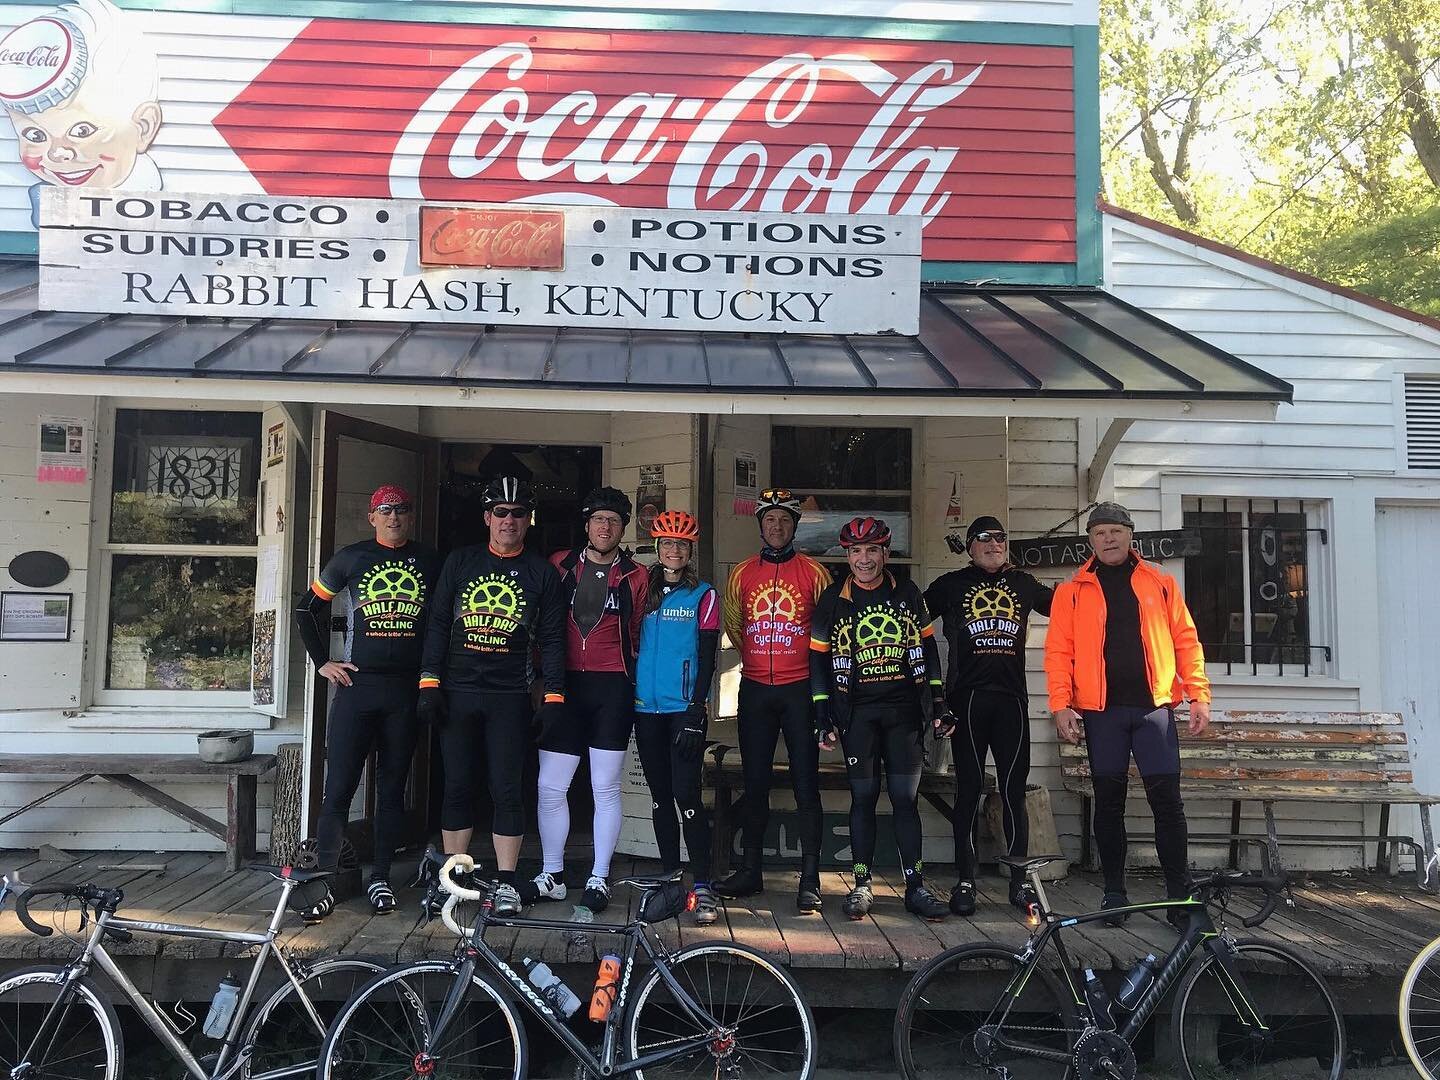 One of our favorite stops! 🐇

#ride #ohio #bike #bikelife #roadbike #bicycle #cincy #cincinnati #letsride #ride #bikes #cycling #roadcycling #wyoming #workout #motivation #cyclingclub #ky